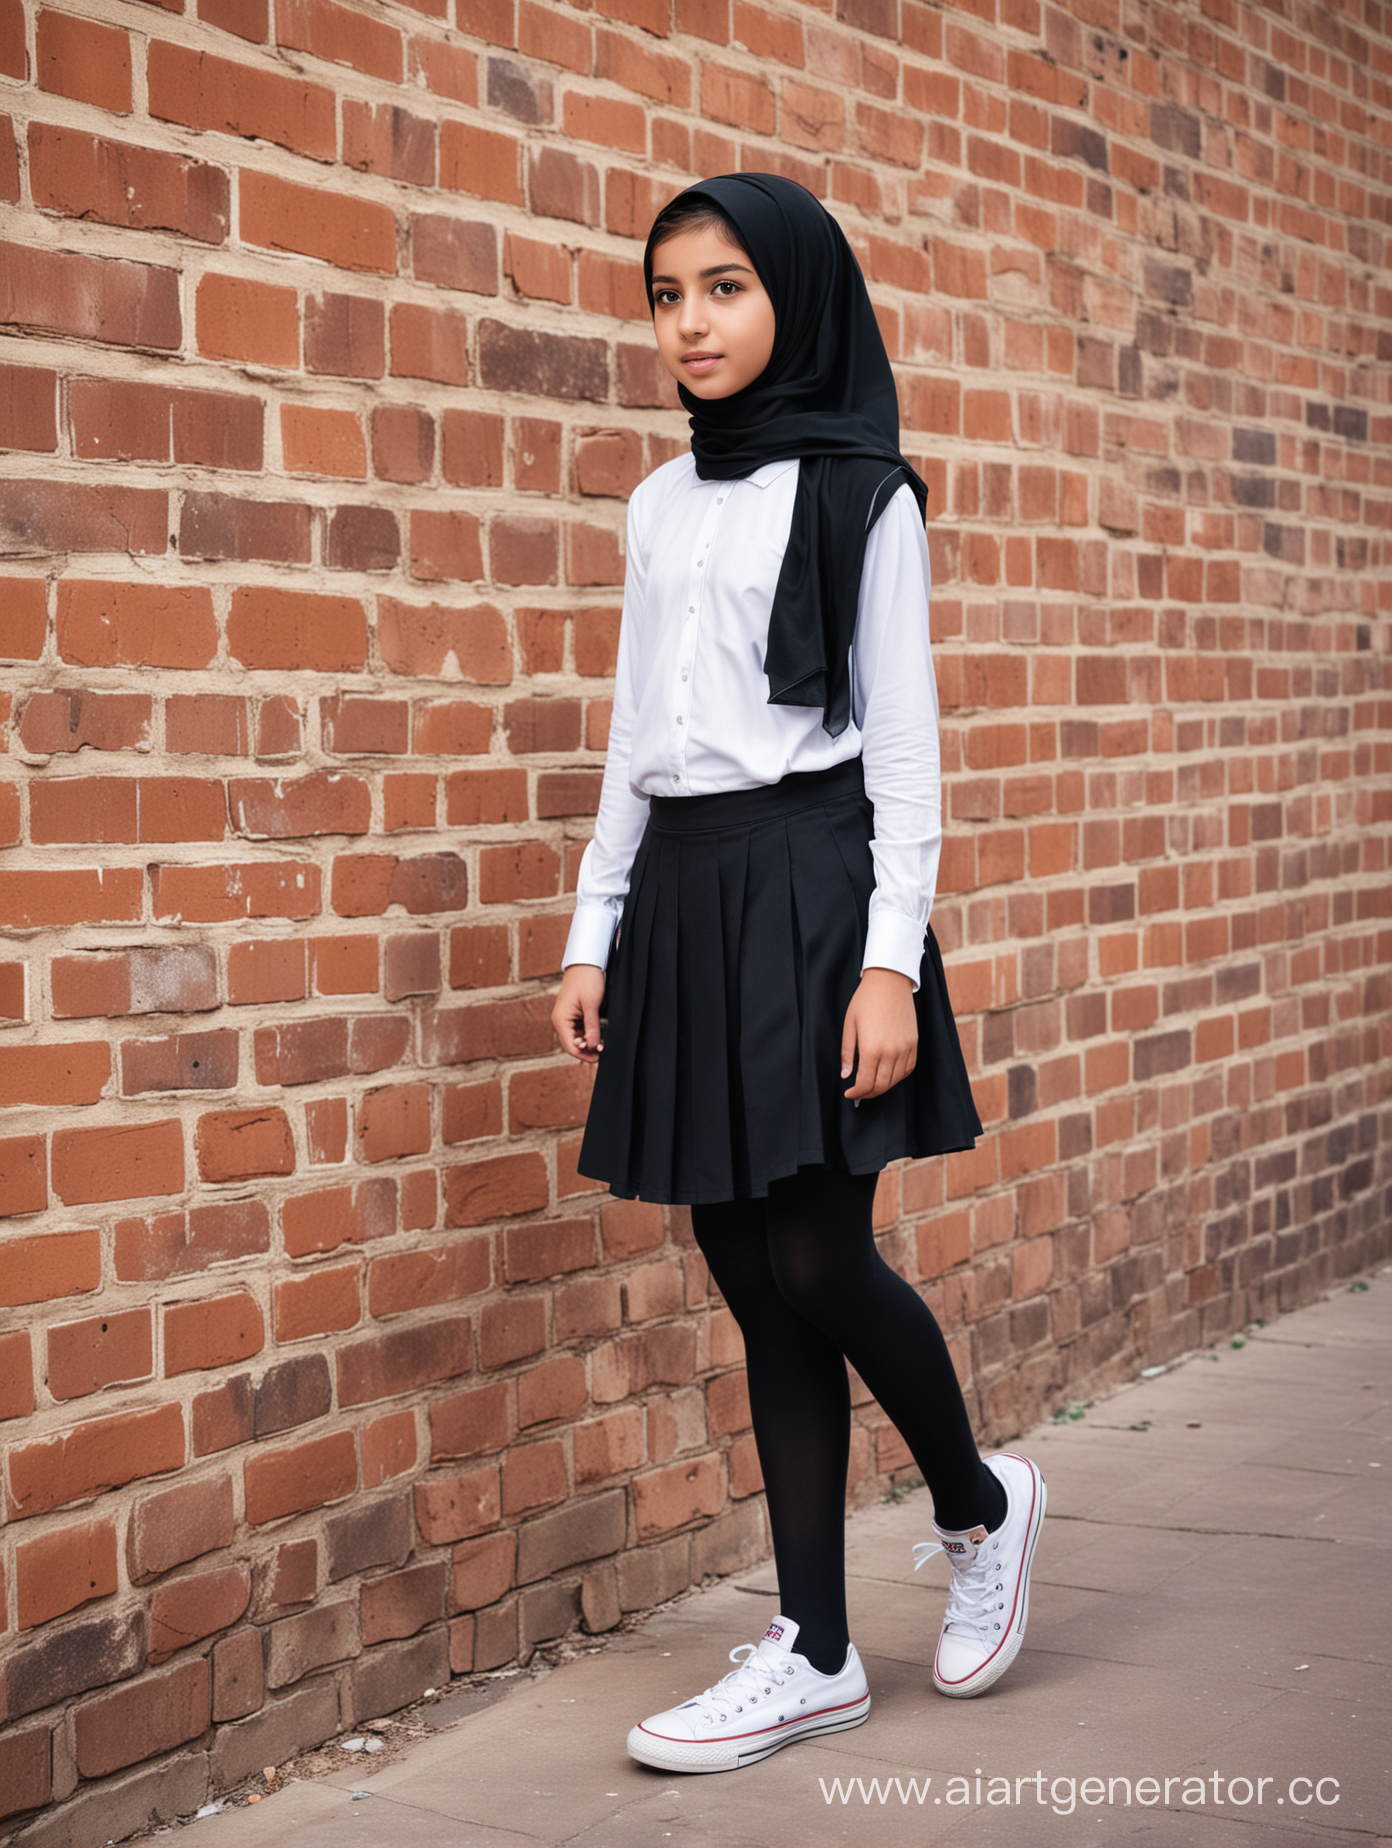 A little girl, 12 years old, hijab, knee high school skirt, white short converse shoes, school uniform, black opaque tights, on the brick wall, from behind, petite body, sharp eyes, arabian, close up, acute angle